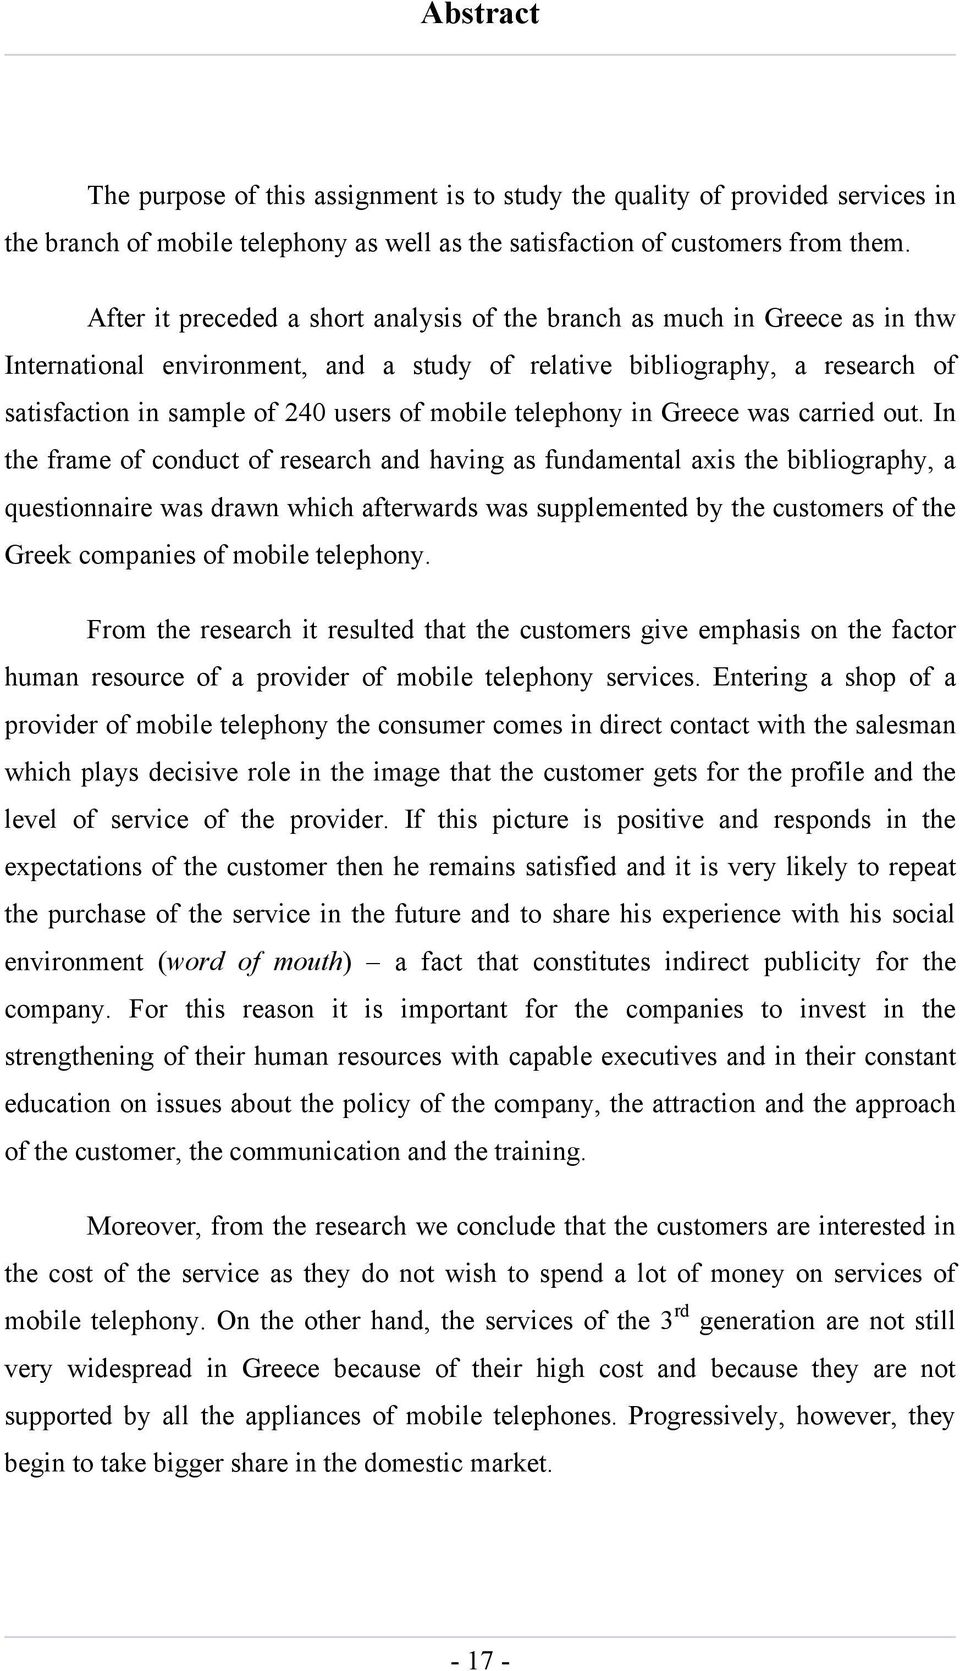 mobile telephony in Greece was carried out.